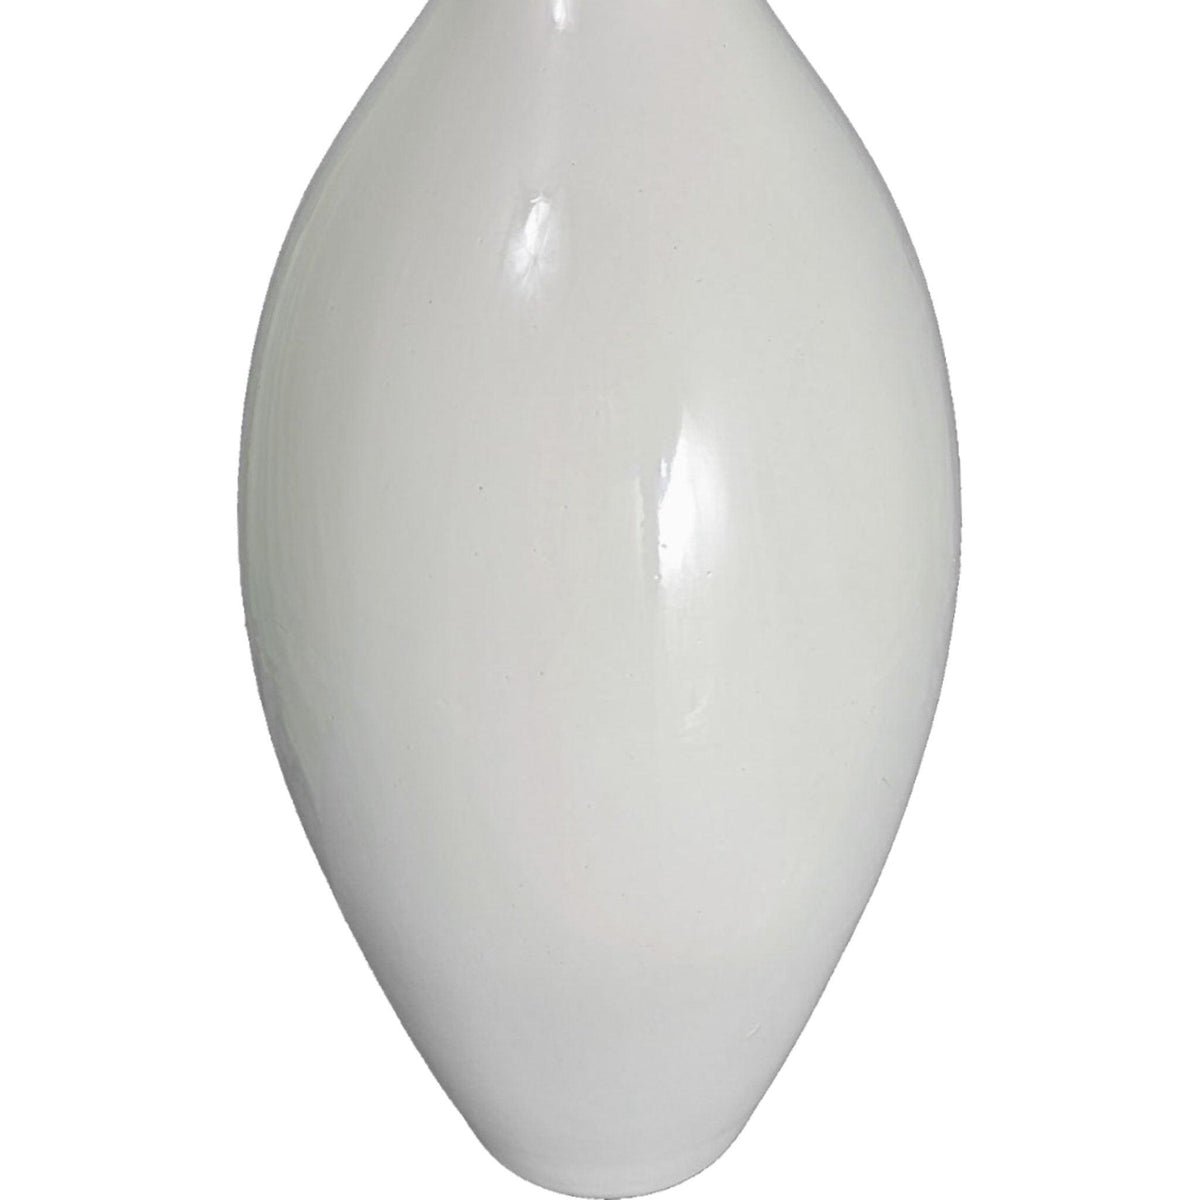 Lee Display's brand new 16in Ceramic Vase comes in a high gloss white finish on sale at leedisplay.com